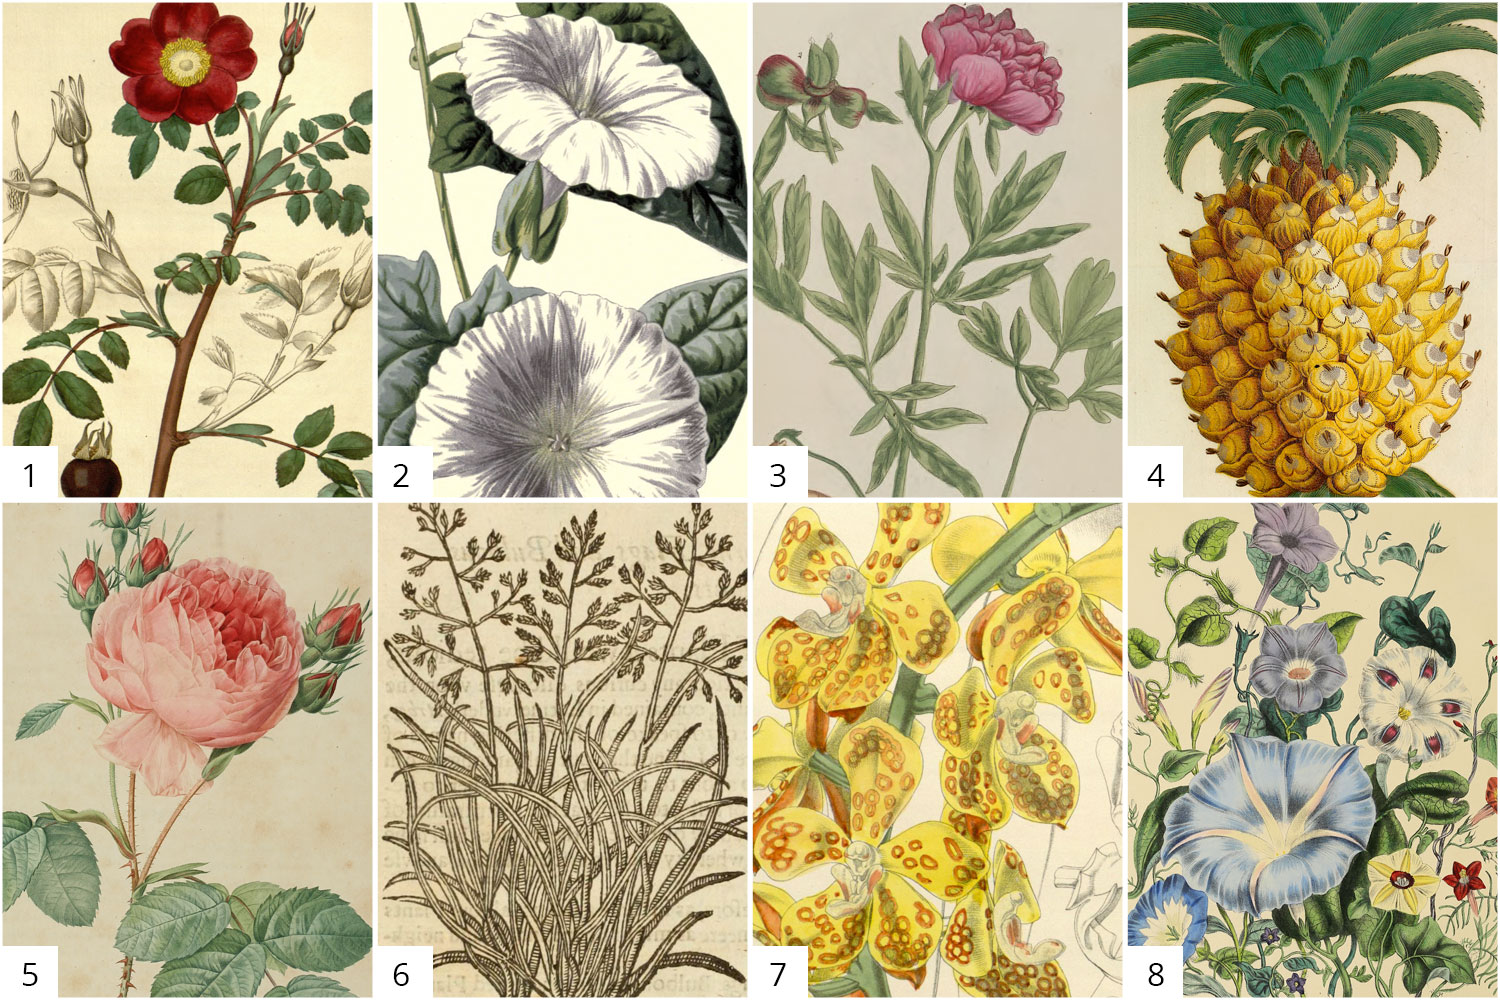 Illustrations from the collections